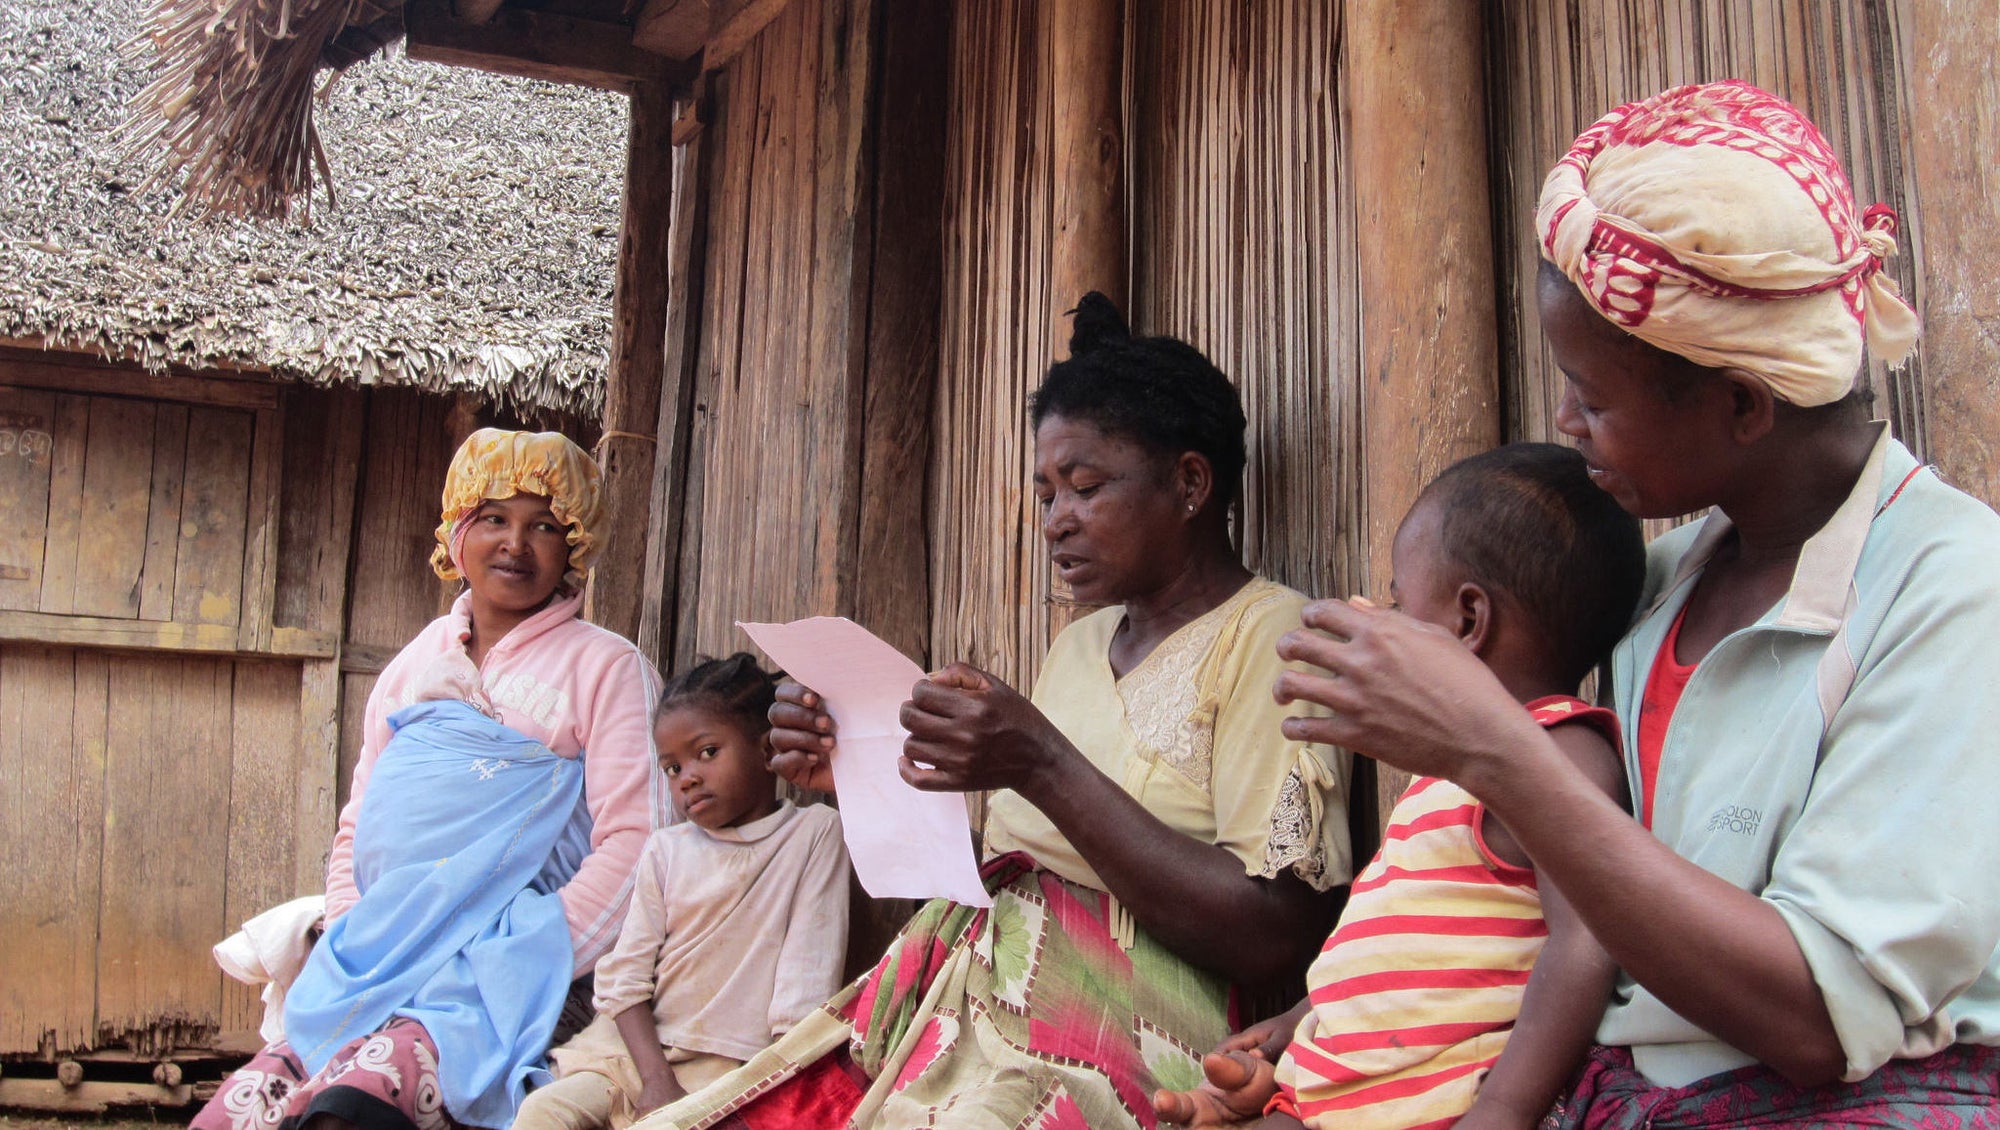 Notes from the Field: Bringing Light to the Rural Artisans of Madagascar